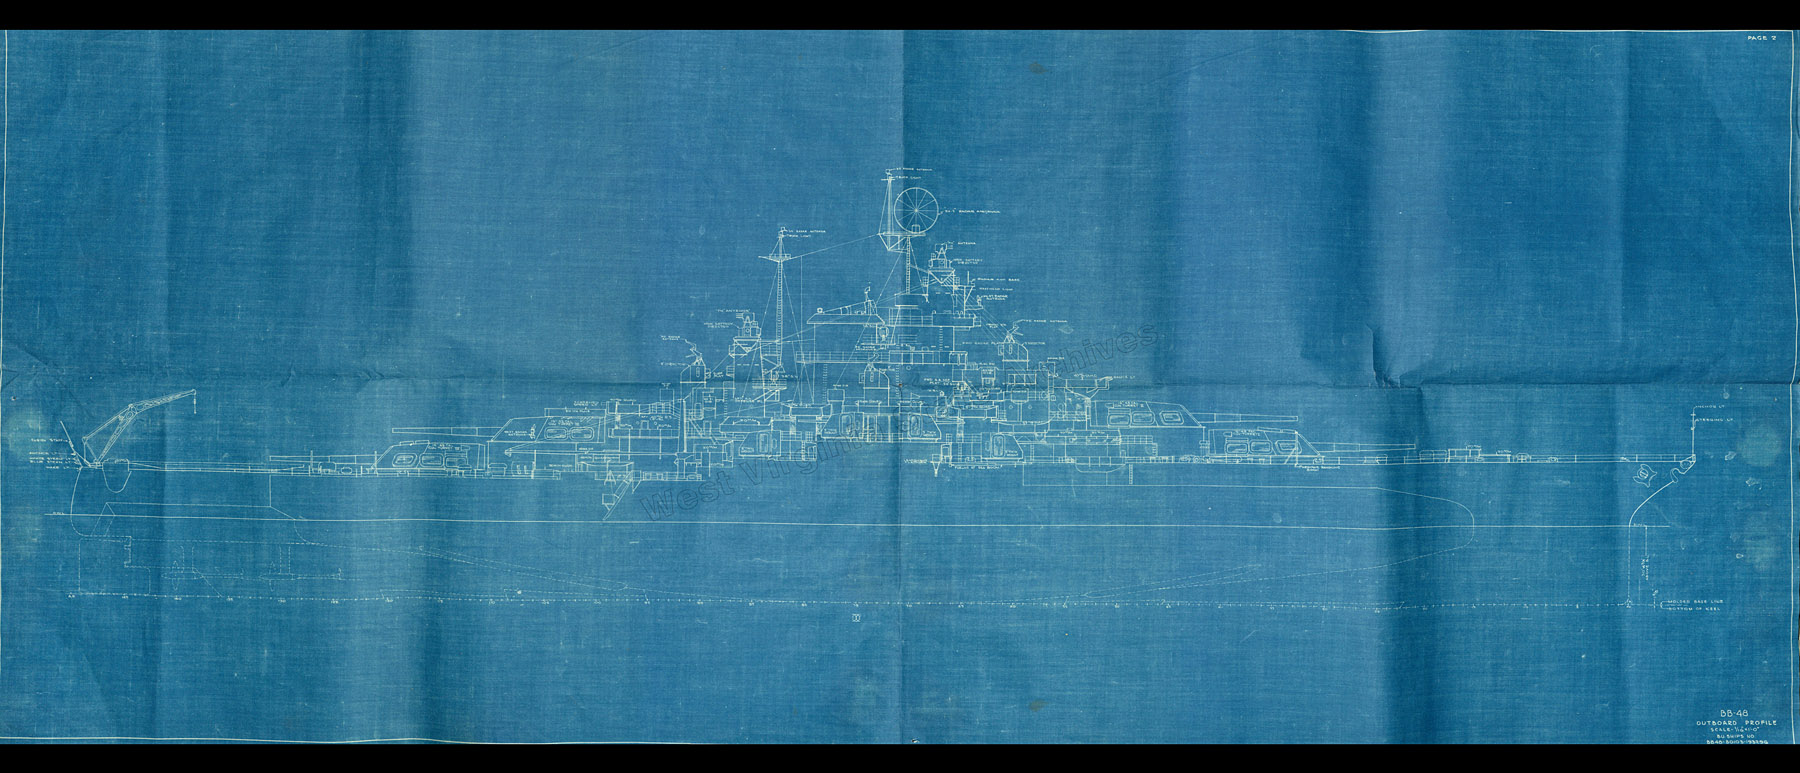 Plan, outboard profile of the USS West Virginia, 1944. (Sc89-51acc)